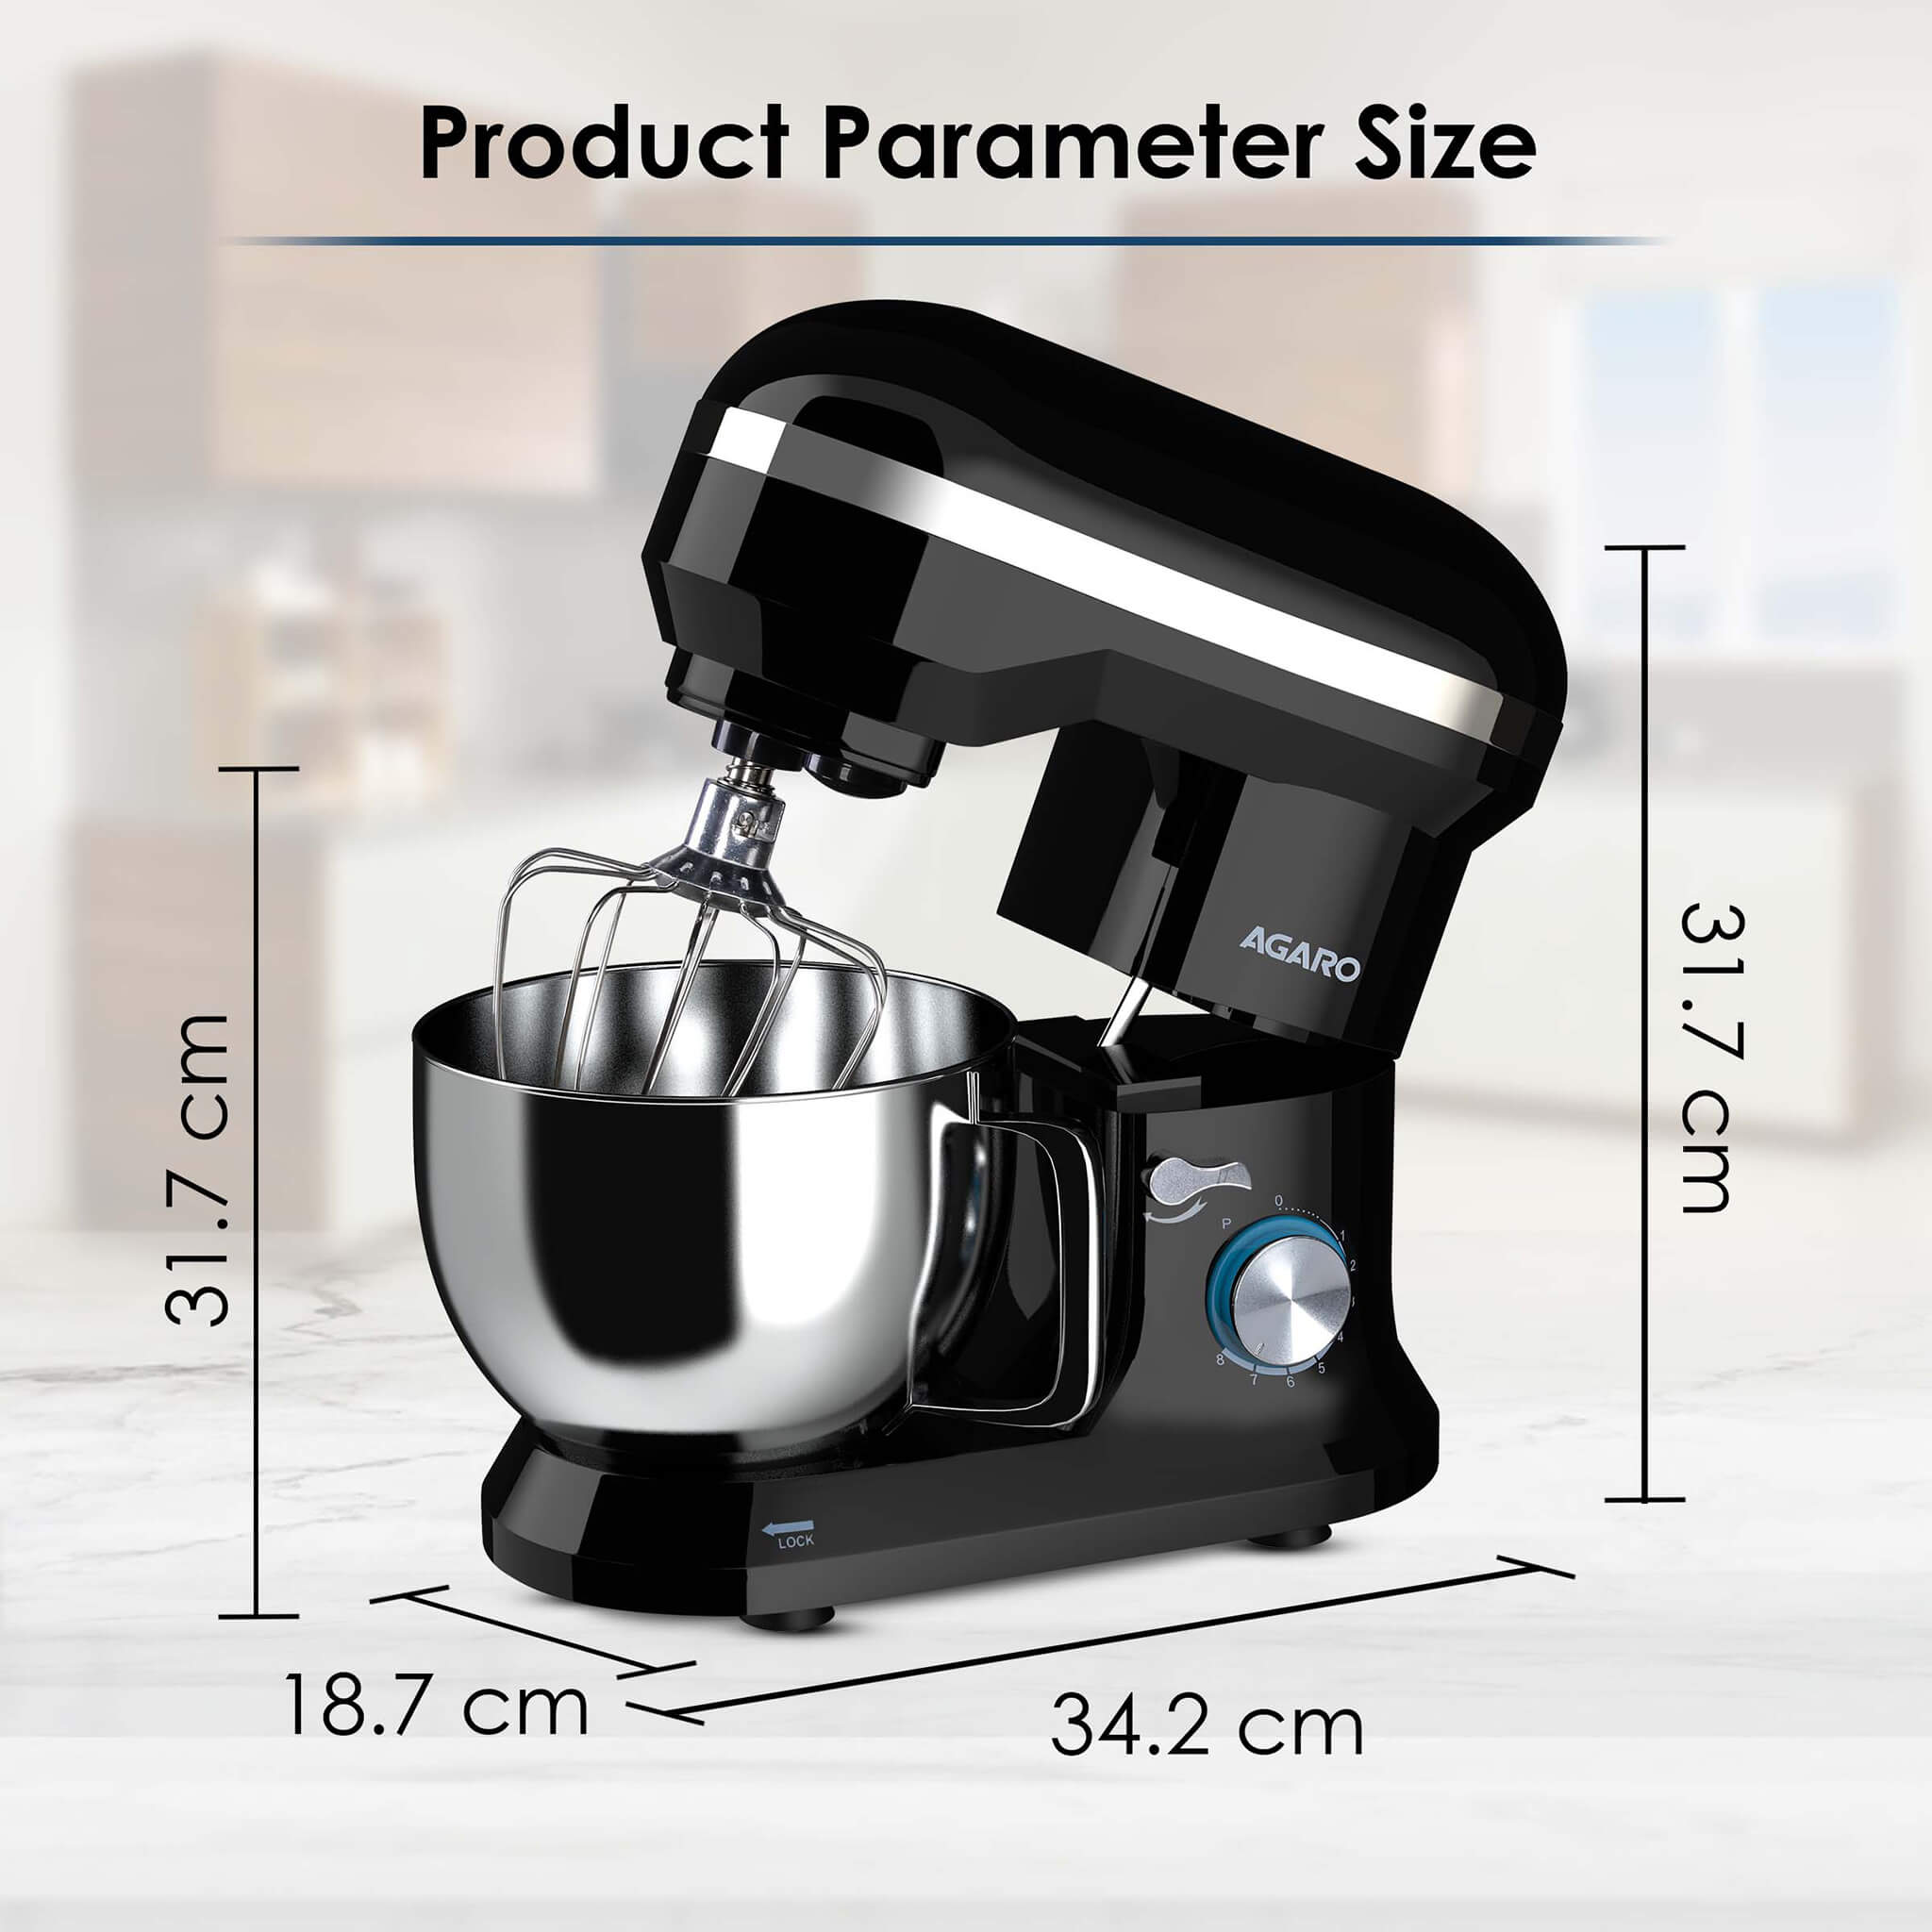 Showvigor Stand Mixer?7-Speed Food Mixer with Stainless Steel India | Ubuy